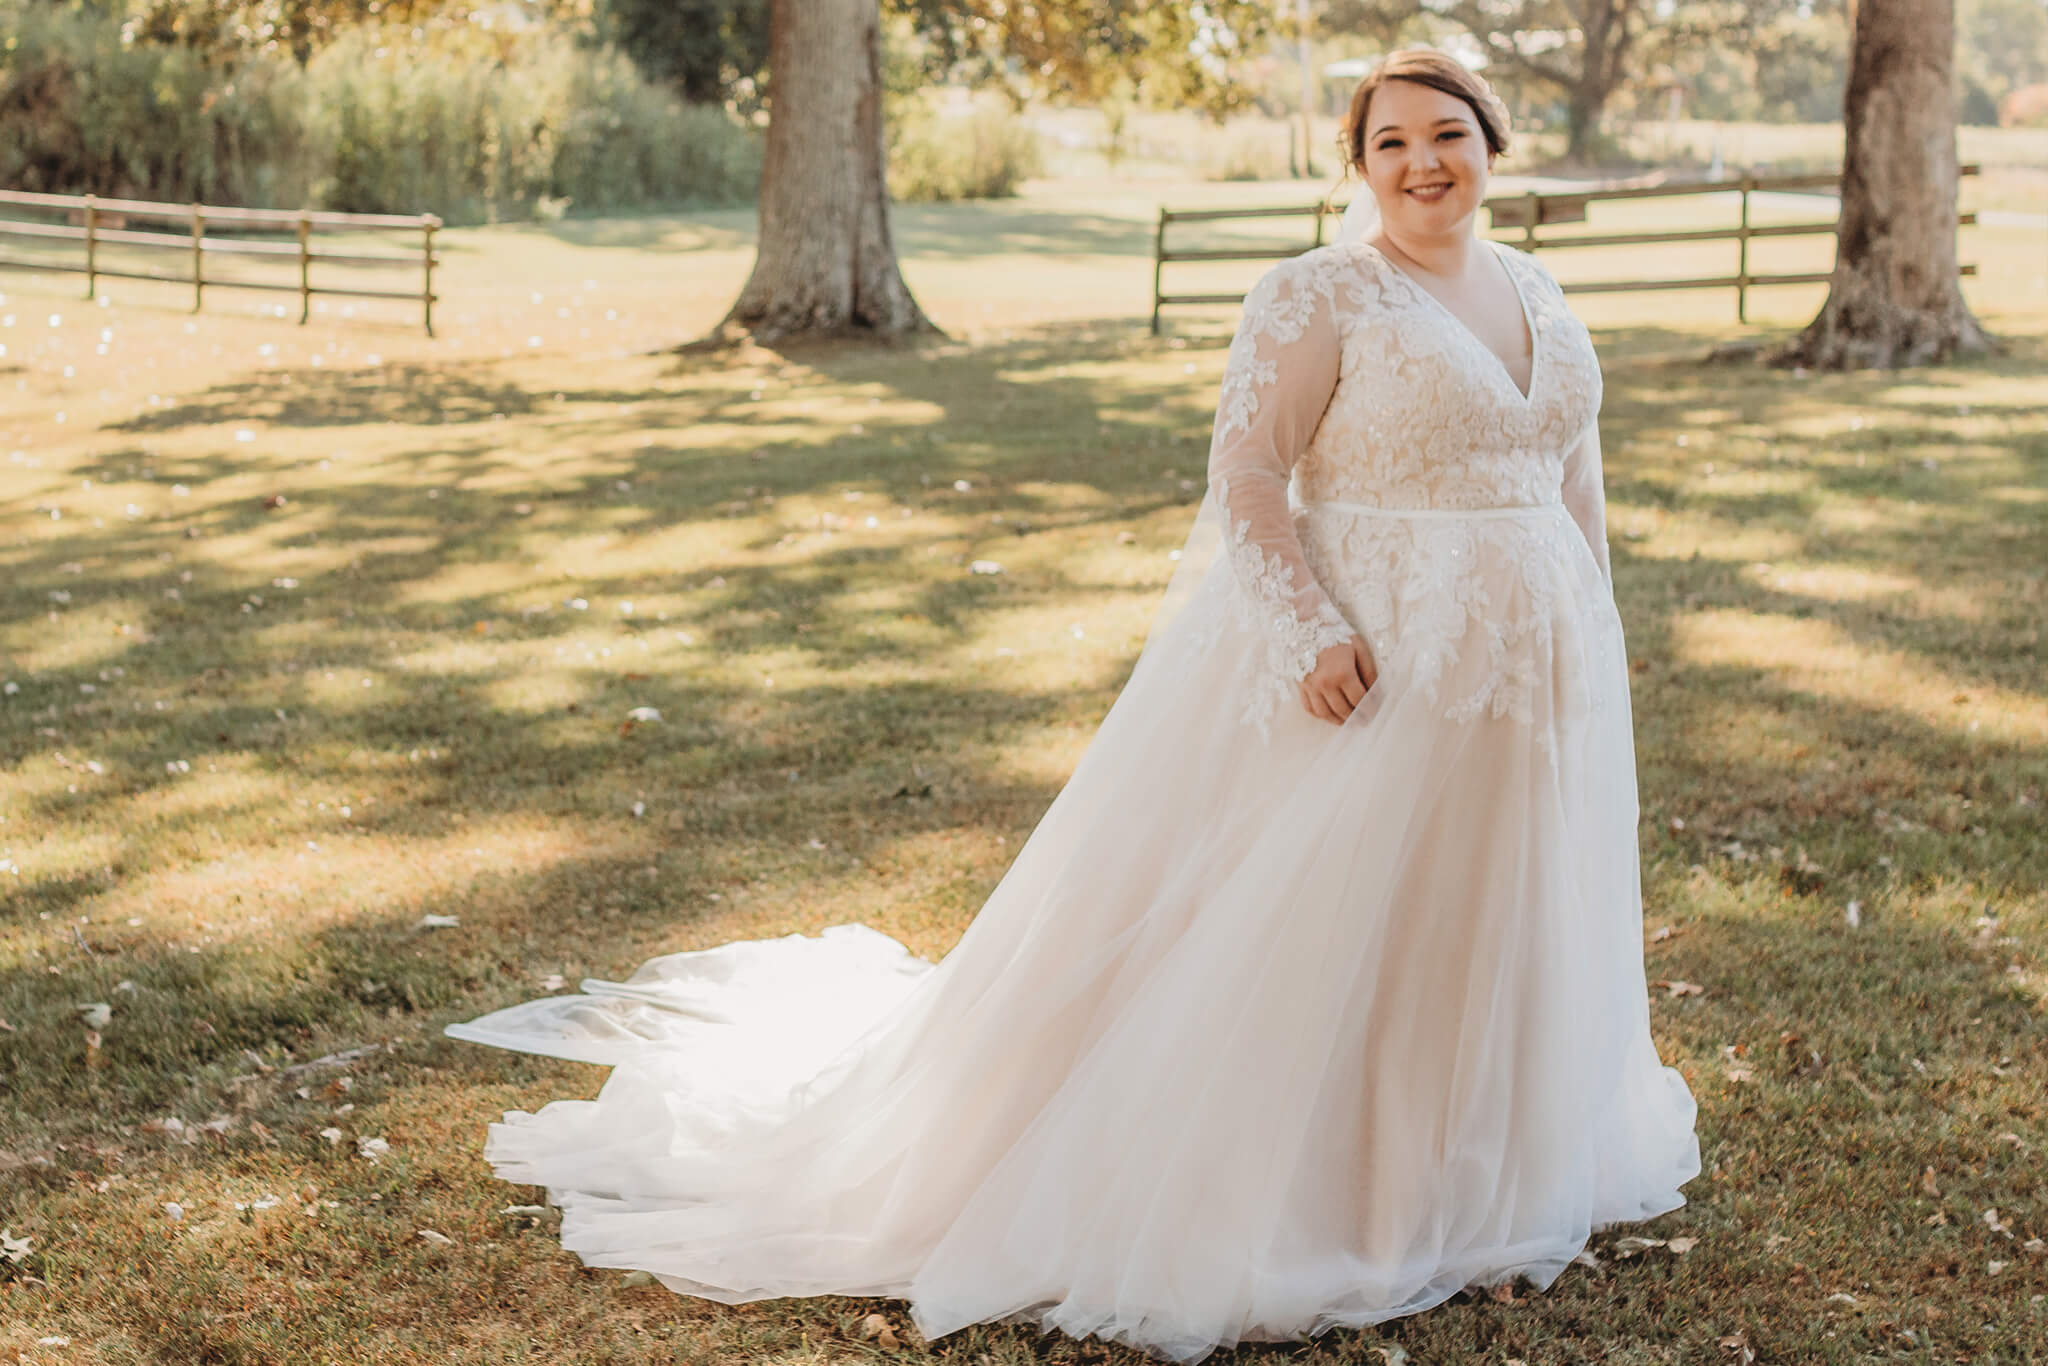 We are in love with Allie's Stunning Bridal Look! 